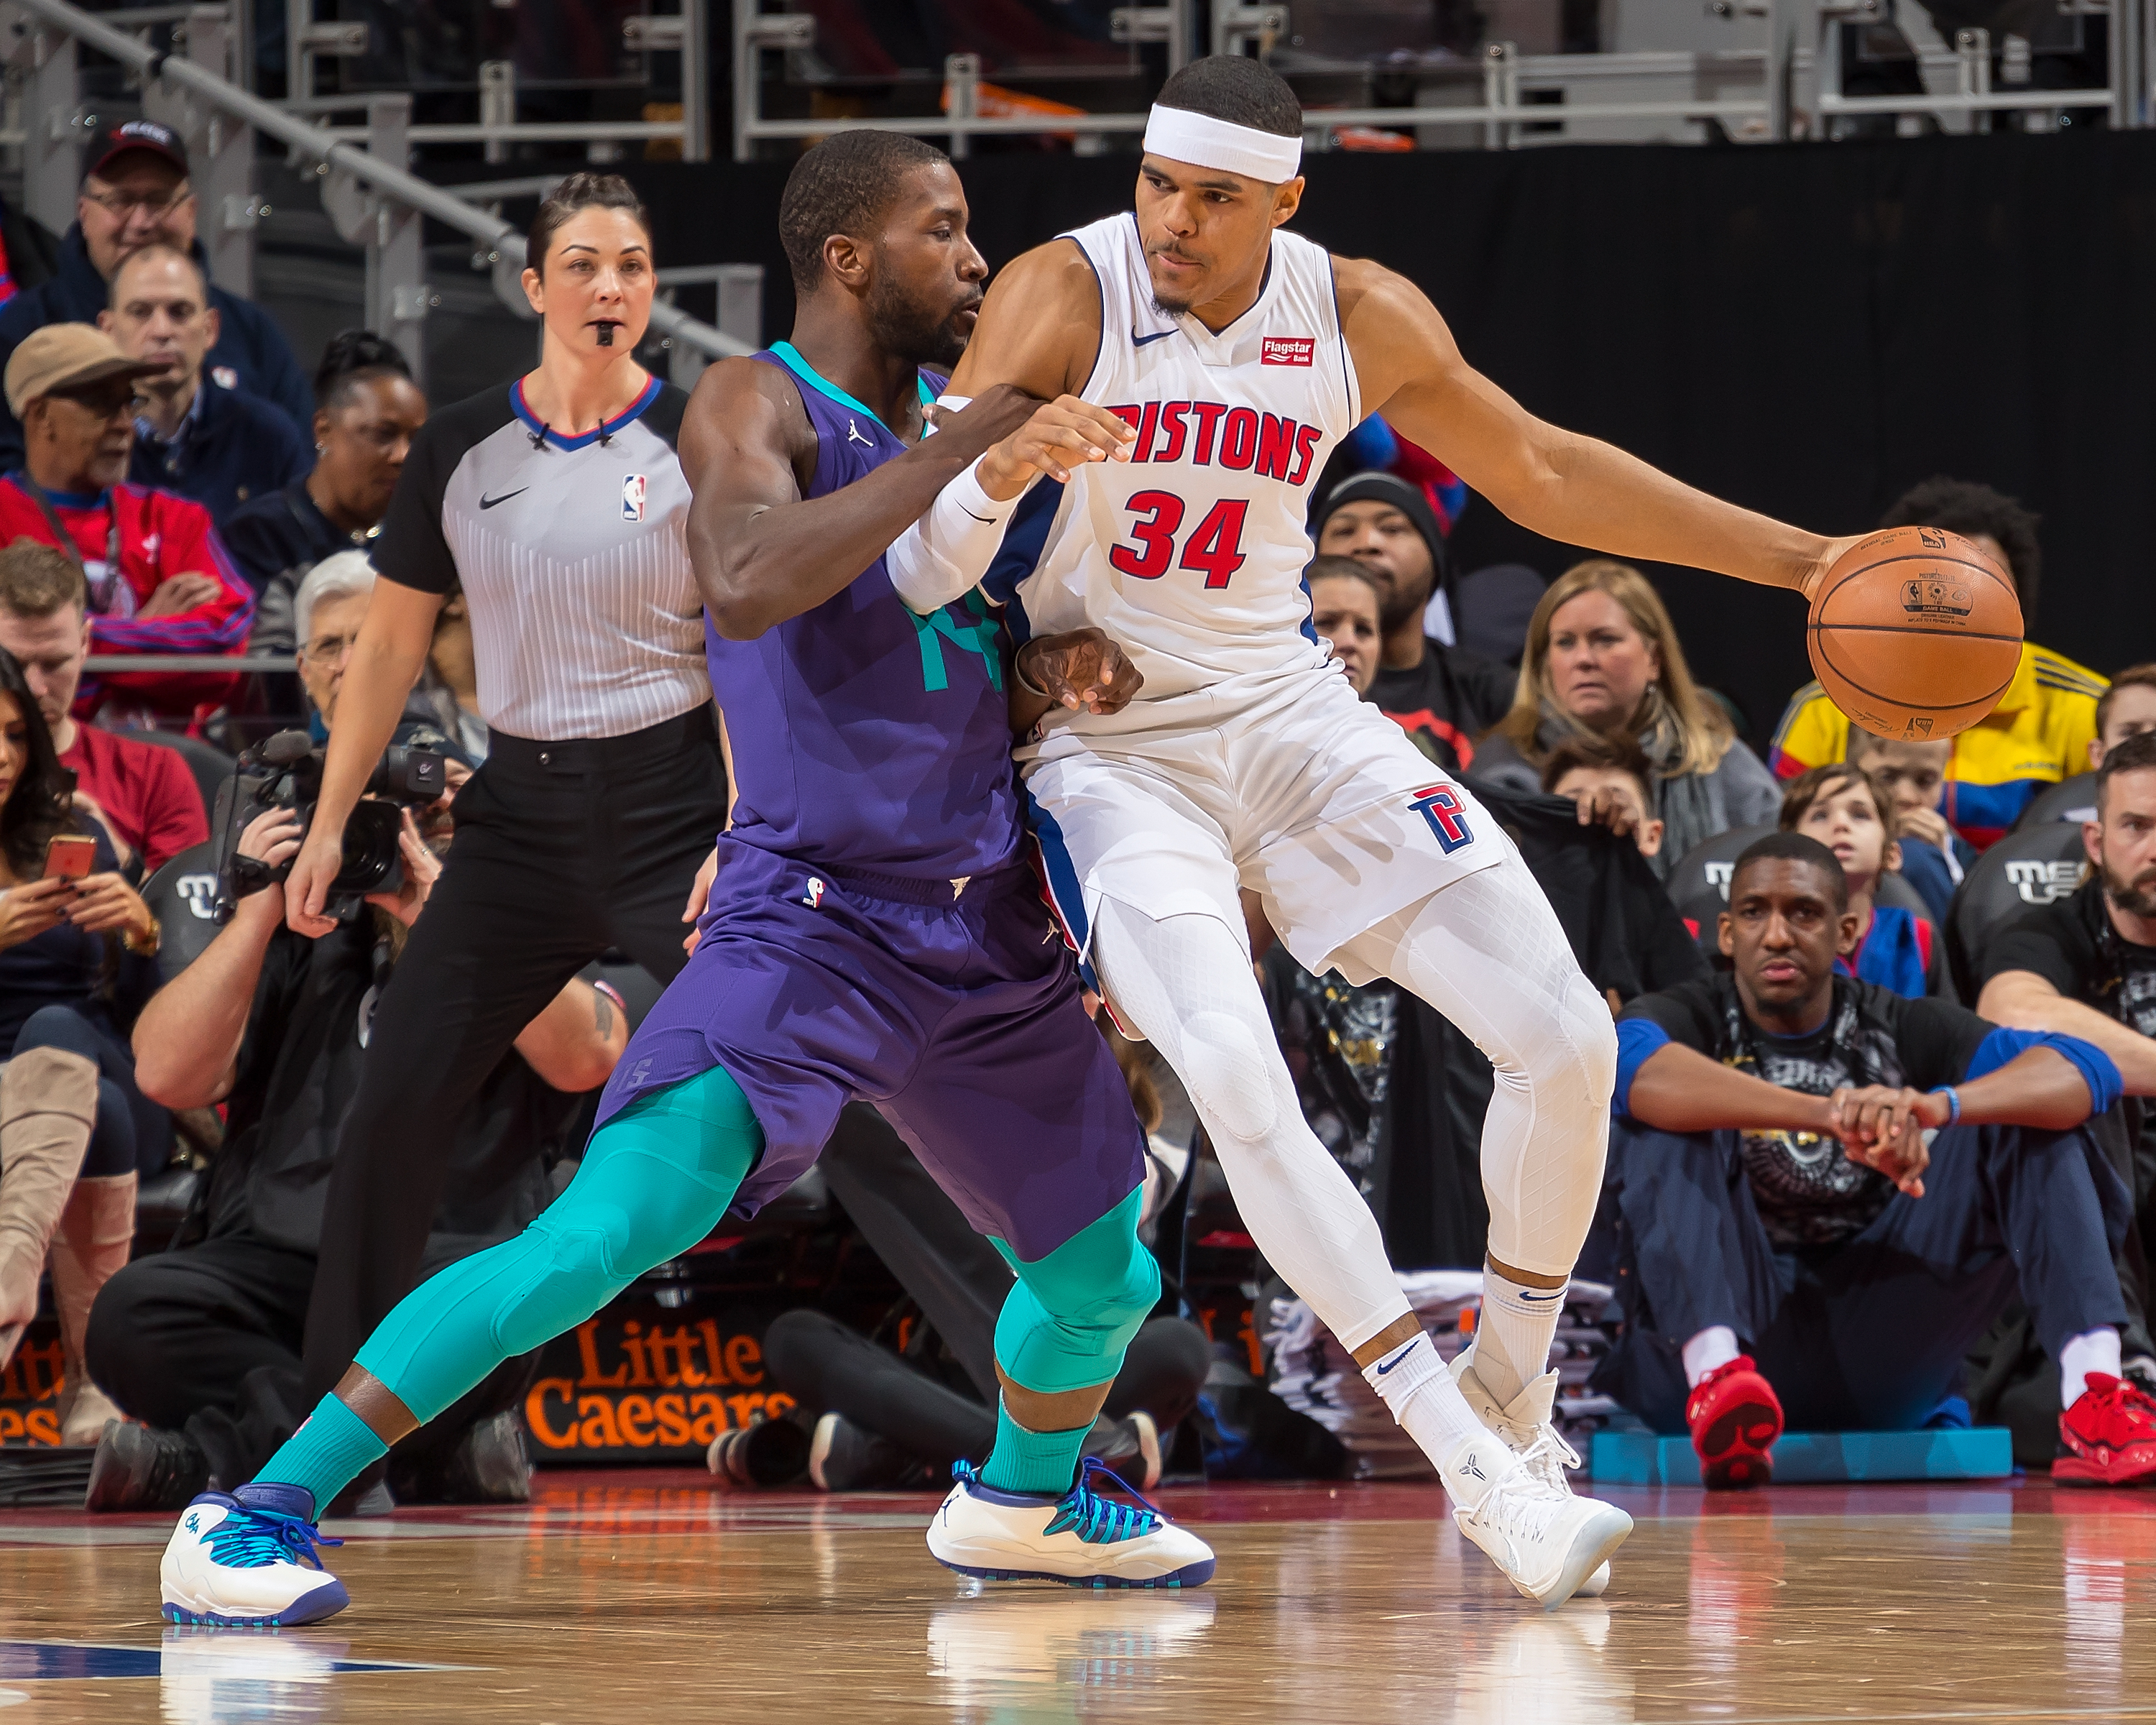 Clippers Reportedly Trade Blake Griffin to Pistons in Blockbuster Deal